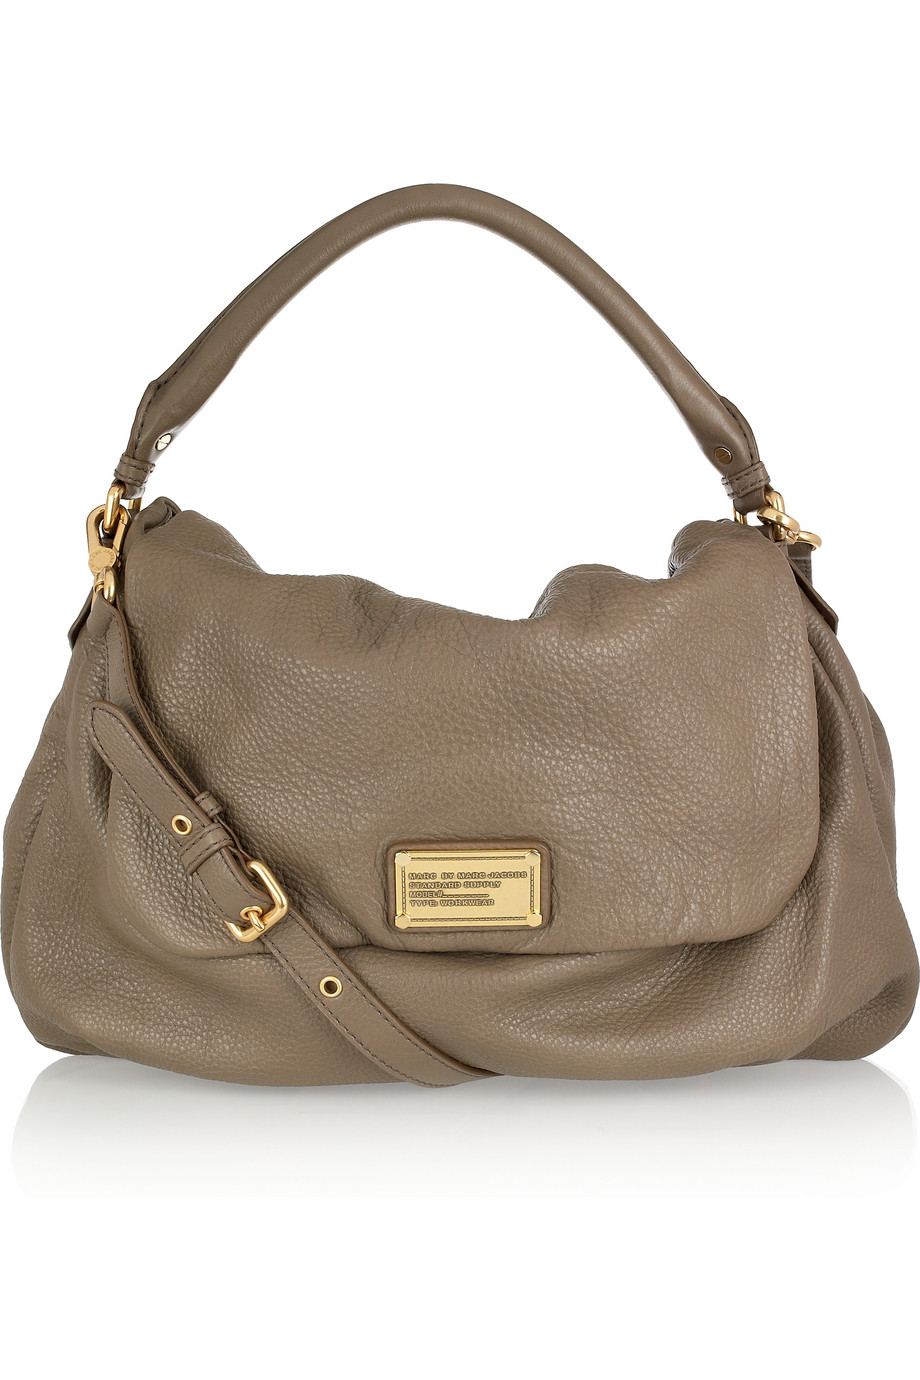 Marc By Marc Jacobs Ukita Textured-leather Shoulder Bag in Taupe (Brown) - Lyst